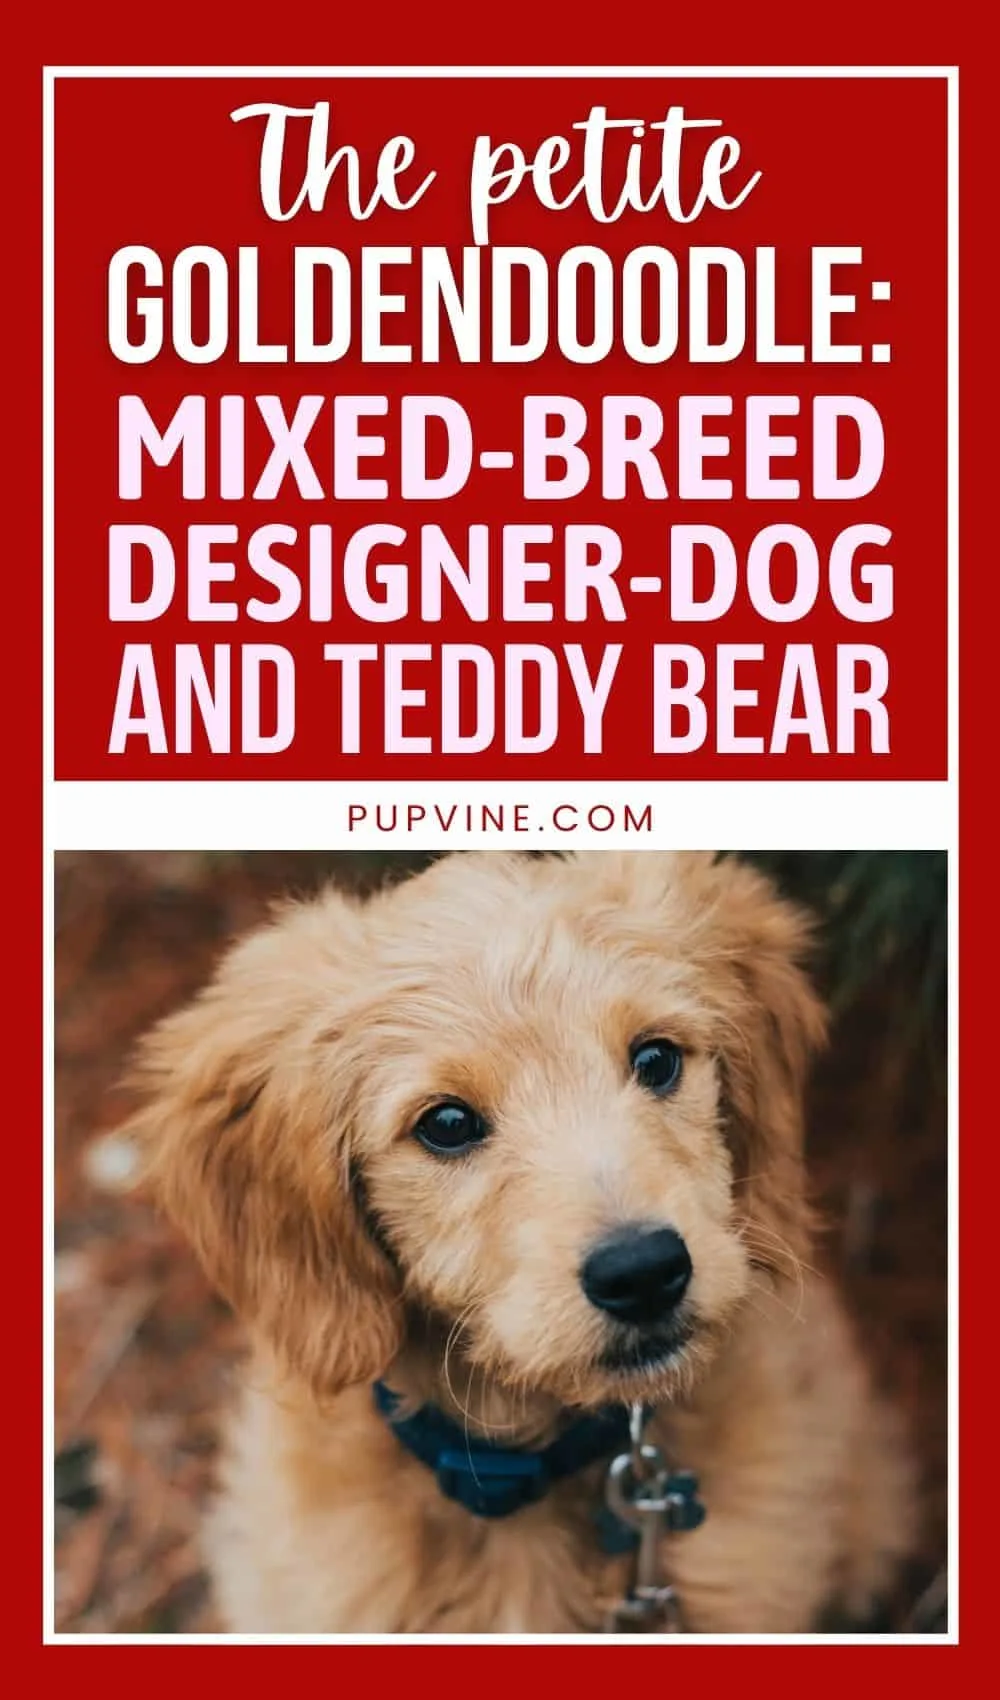 The Petite Goldendoodle Mixed-Breed Designer-Dog And Teddy Bear!